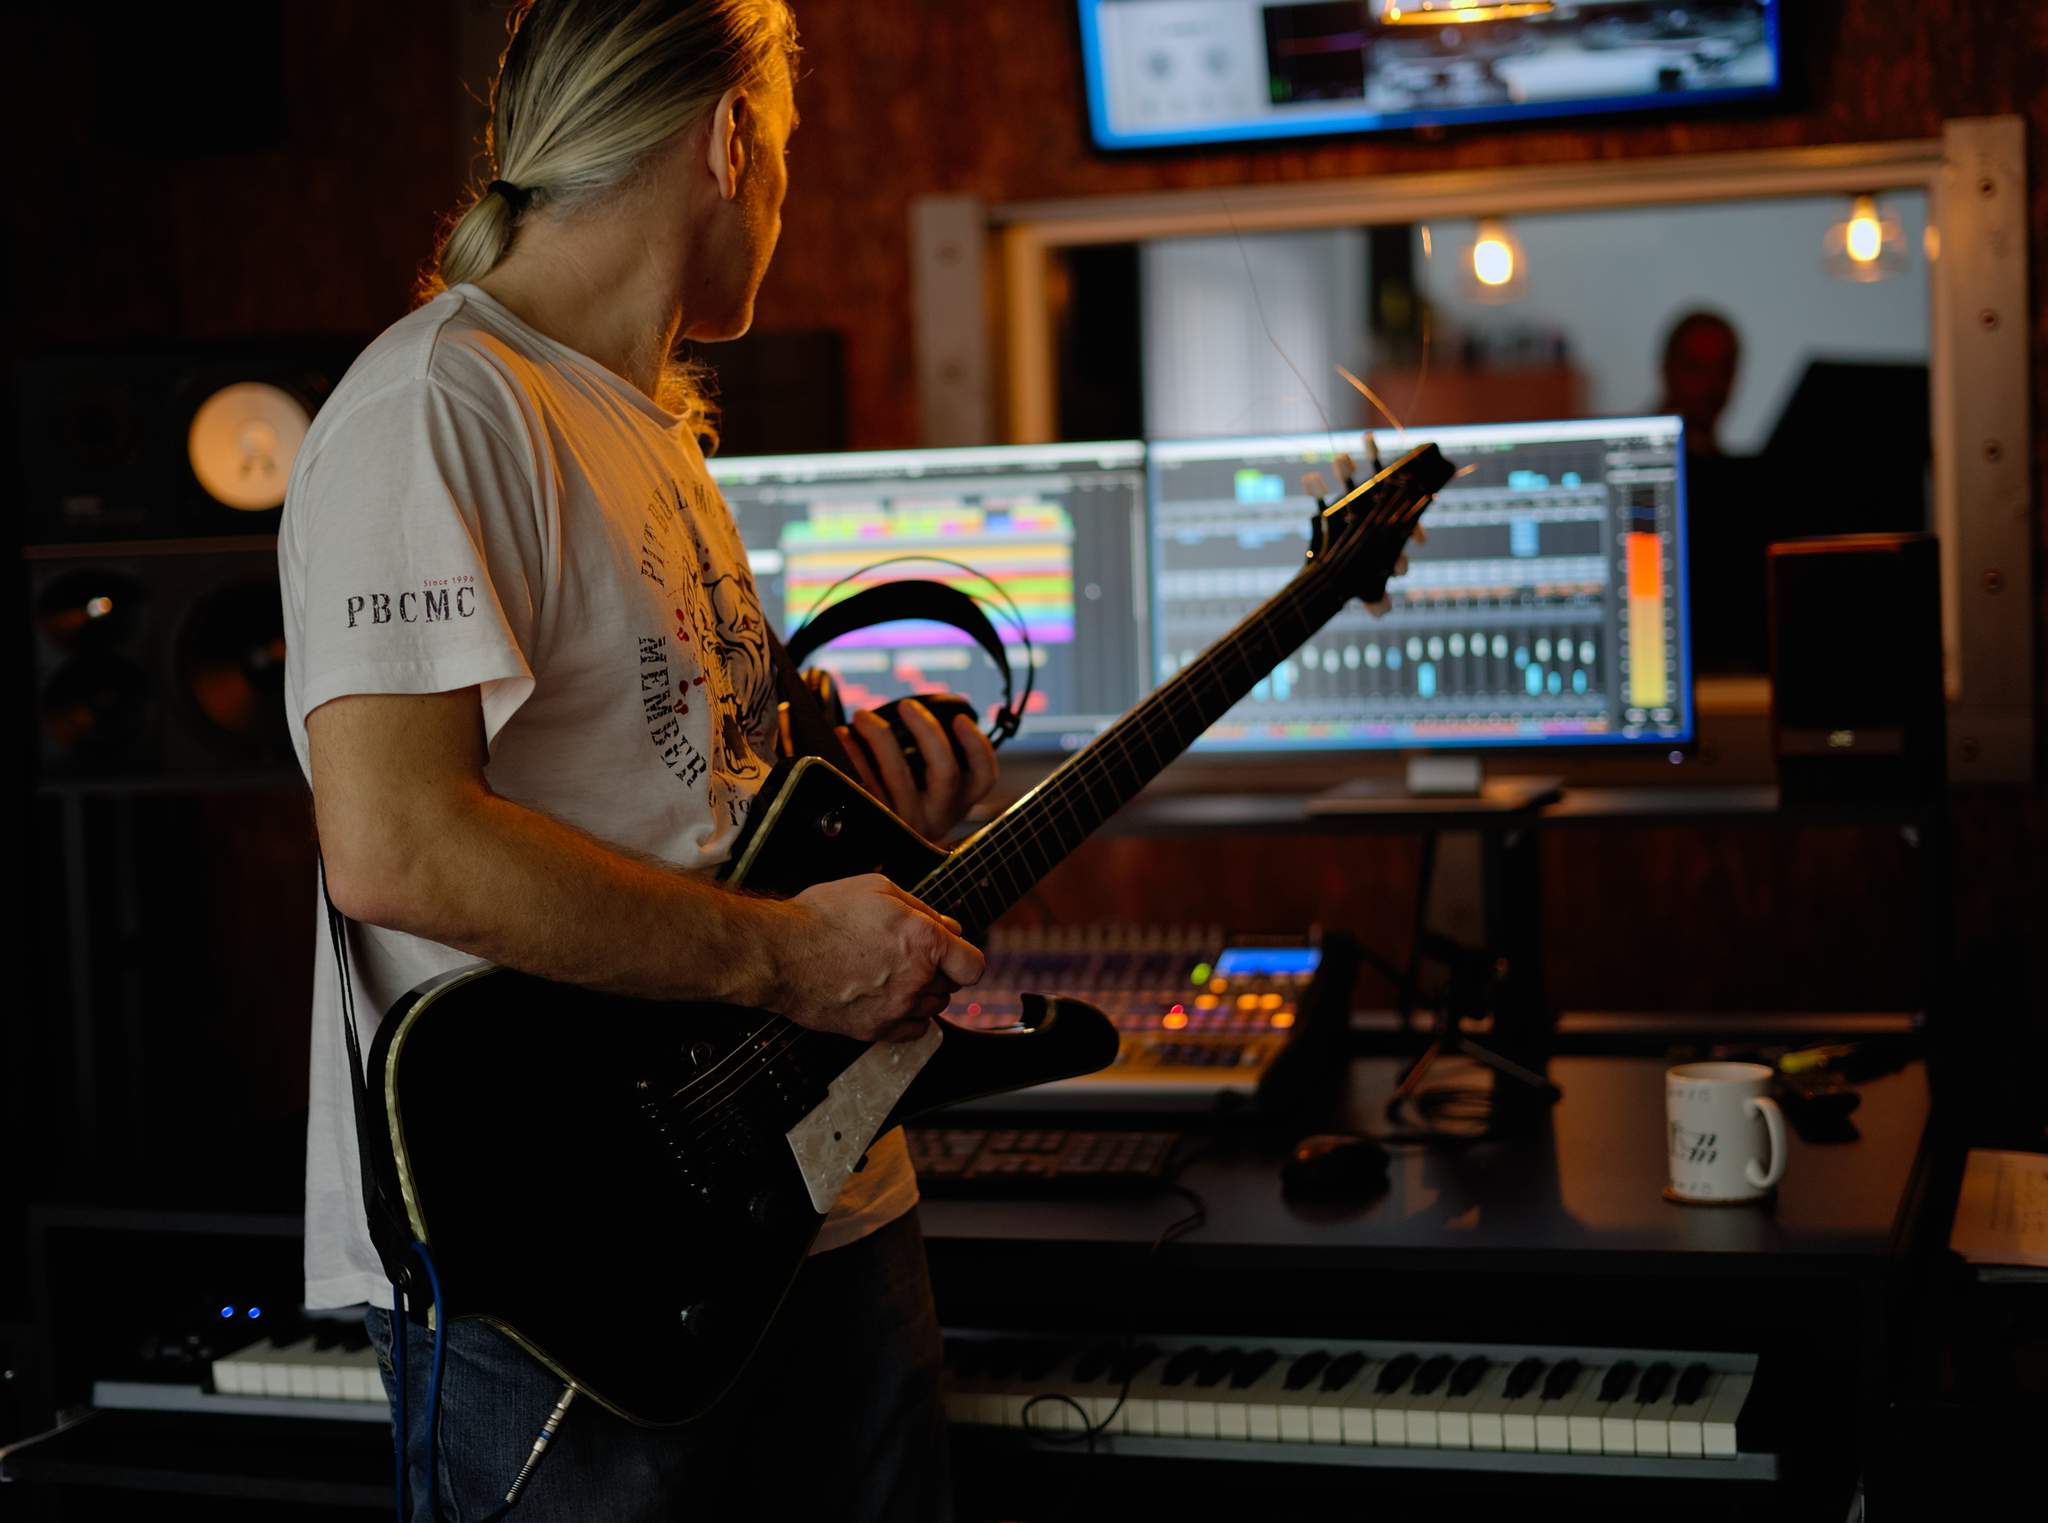 Michal in studio with a bass guitar